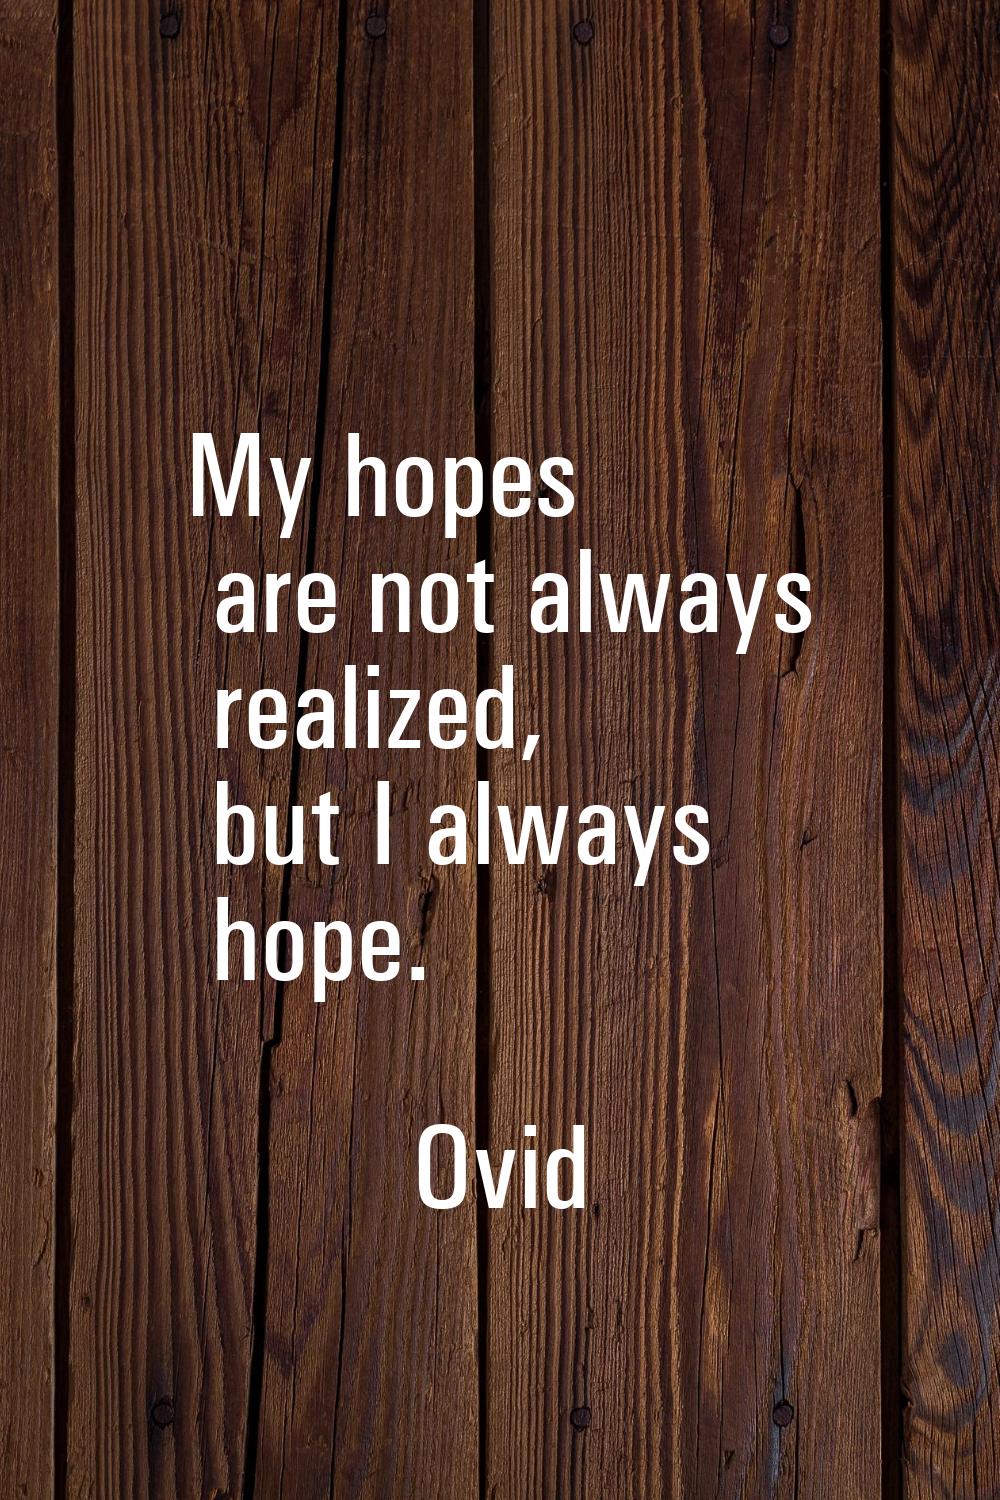 My hopes are not always realized, but I always hope.